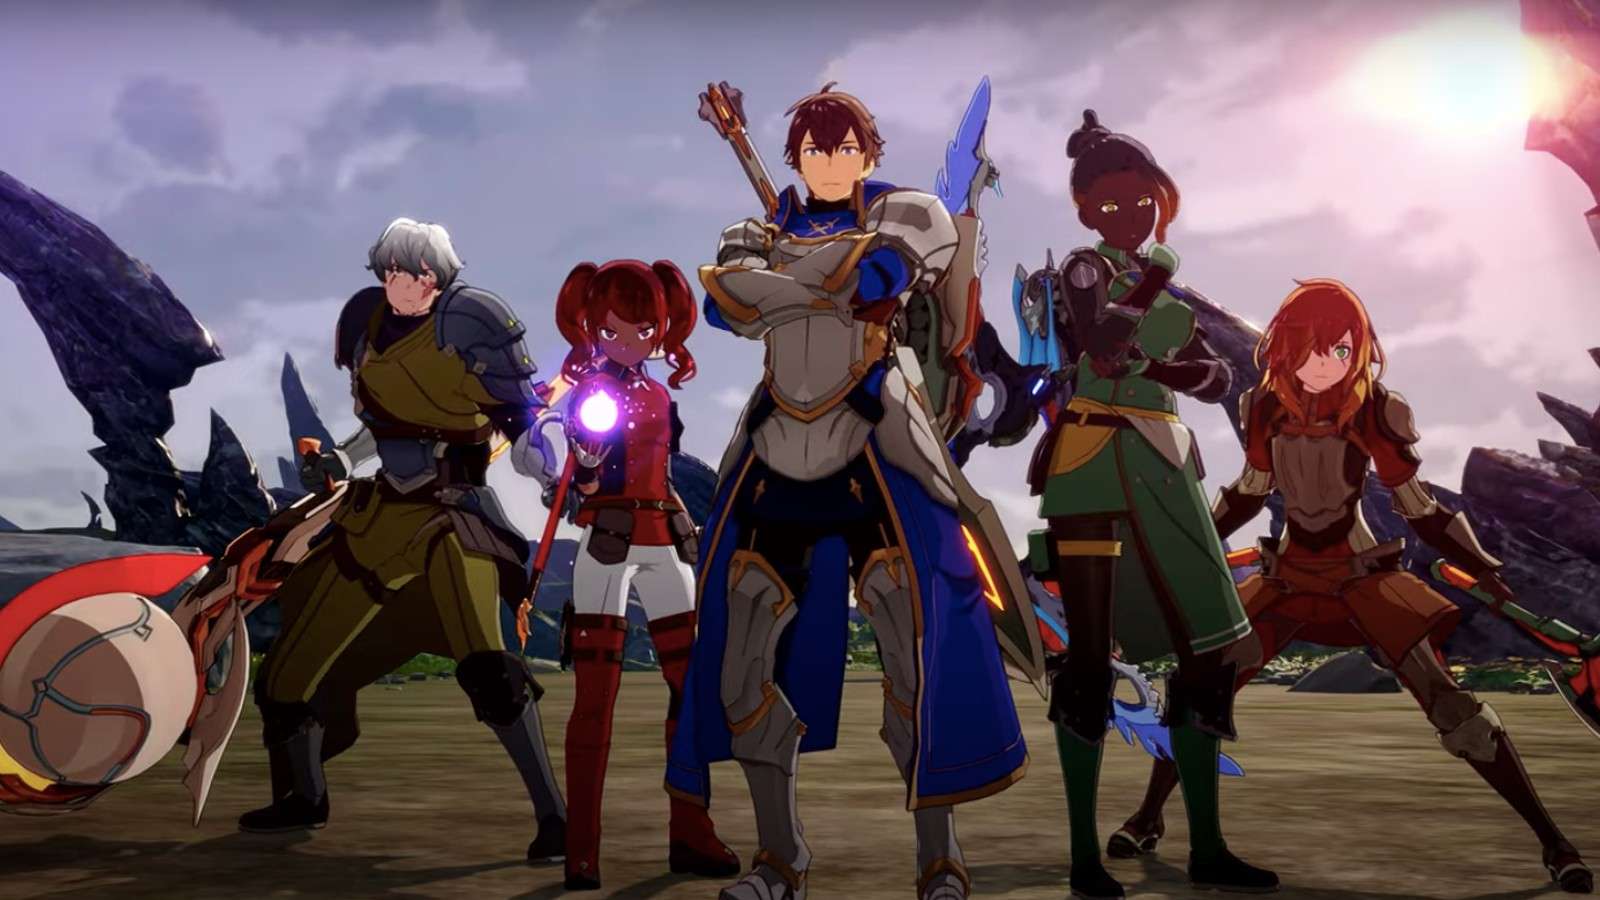 An image of characters from Blue Protocol, likely made in the character creator.